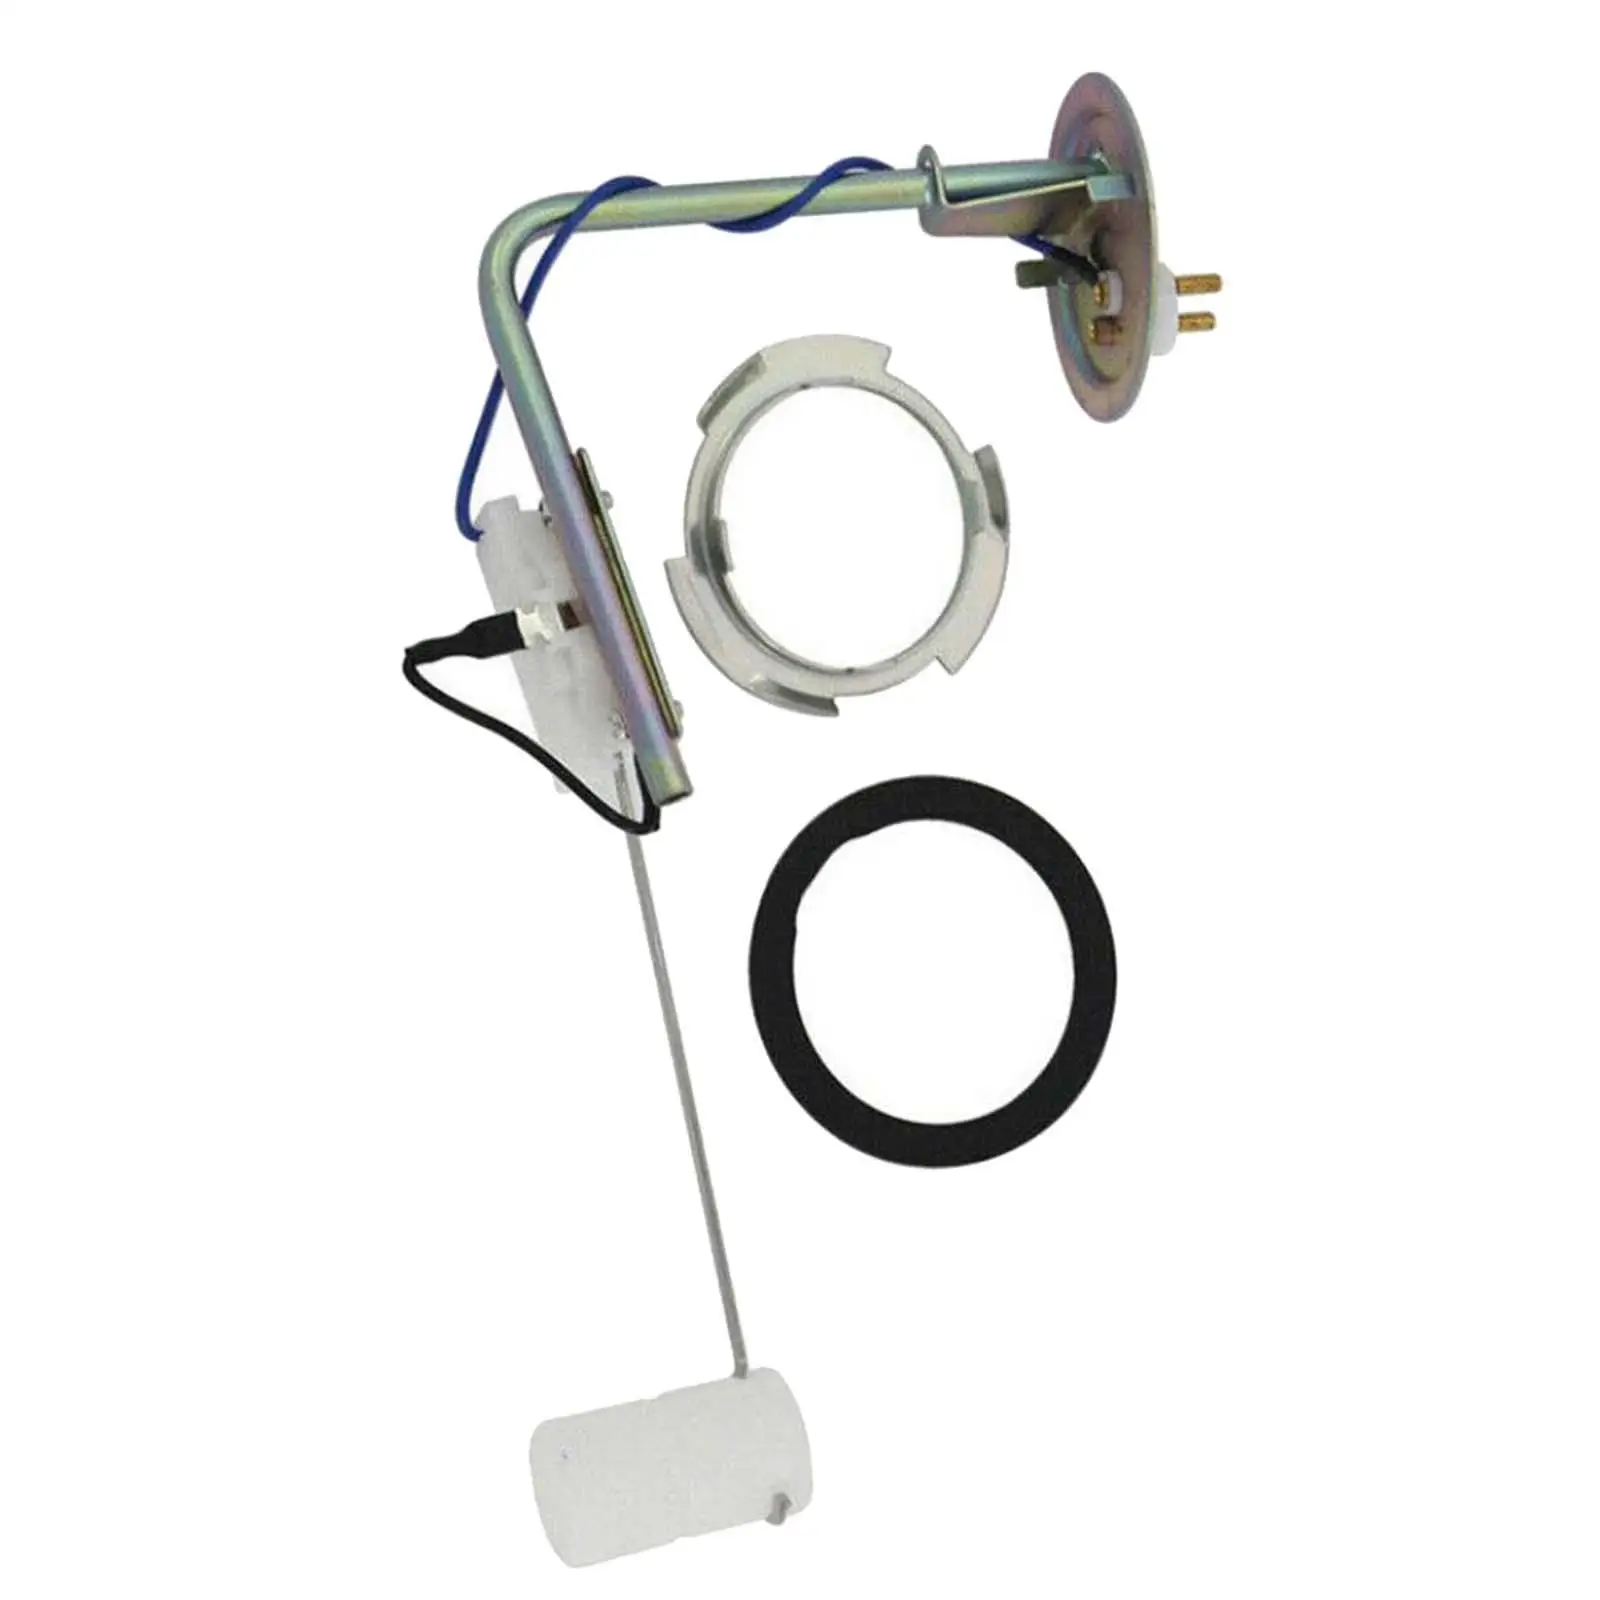 Fuel Pump Sender Easy Installation Repair Parts Replaces Professional E0LY-9275-b Assembly for Lincoln Mercury 1980-1989